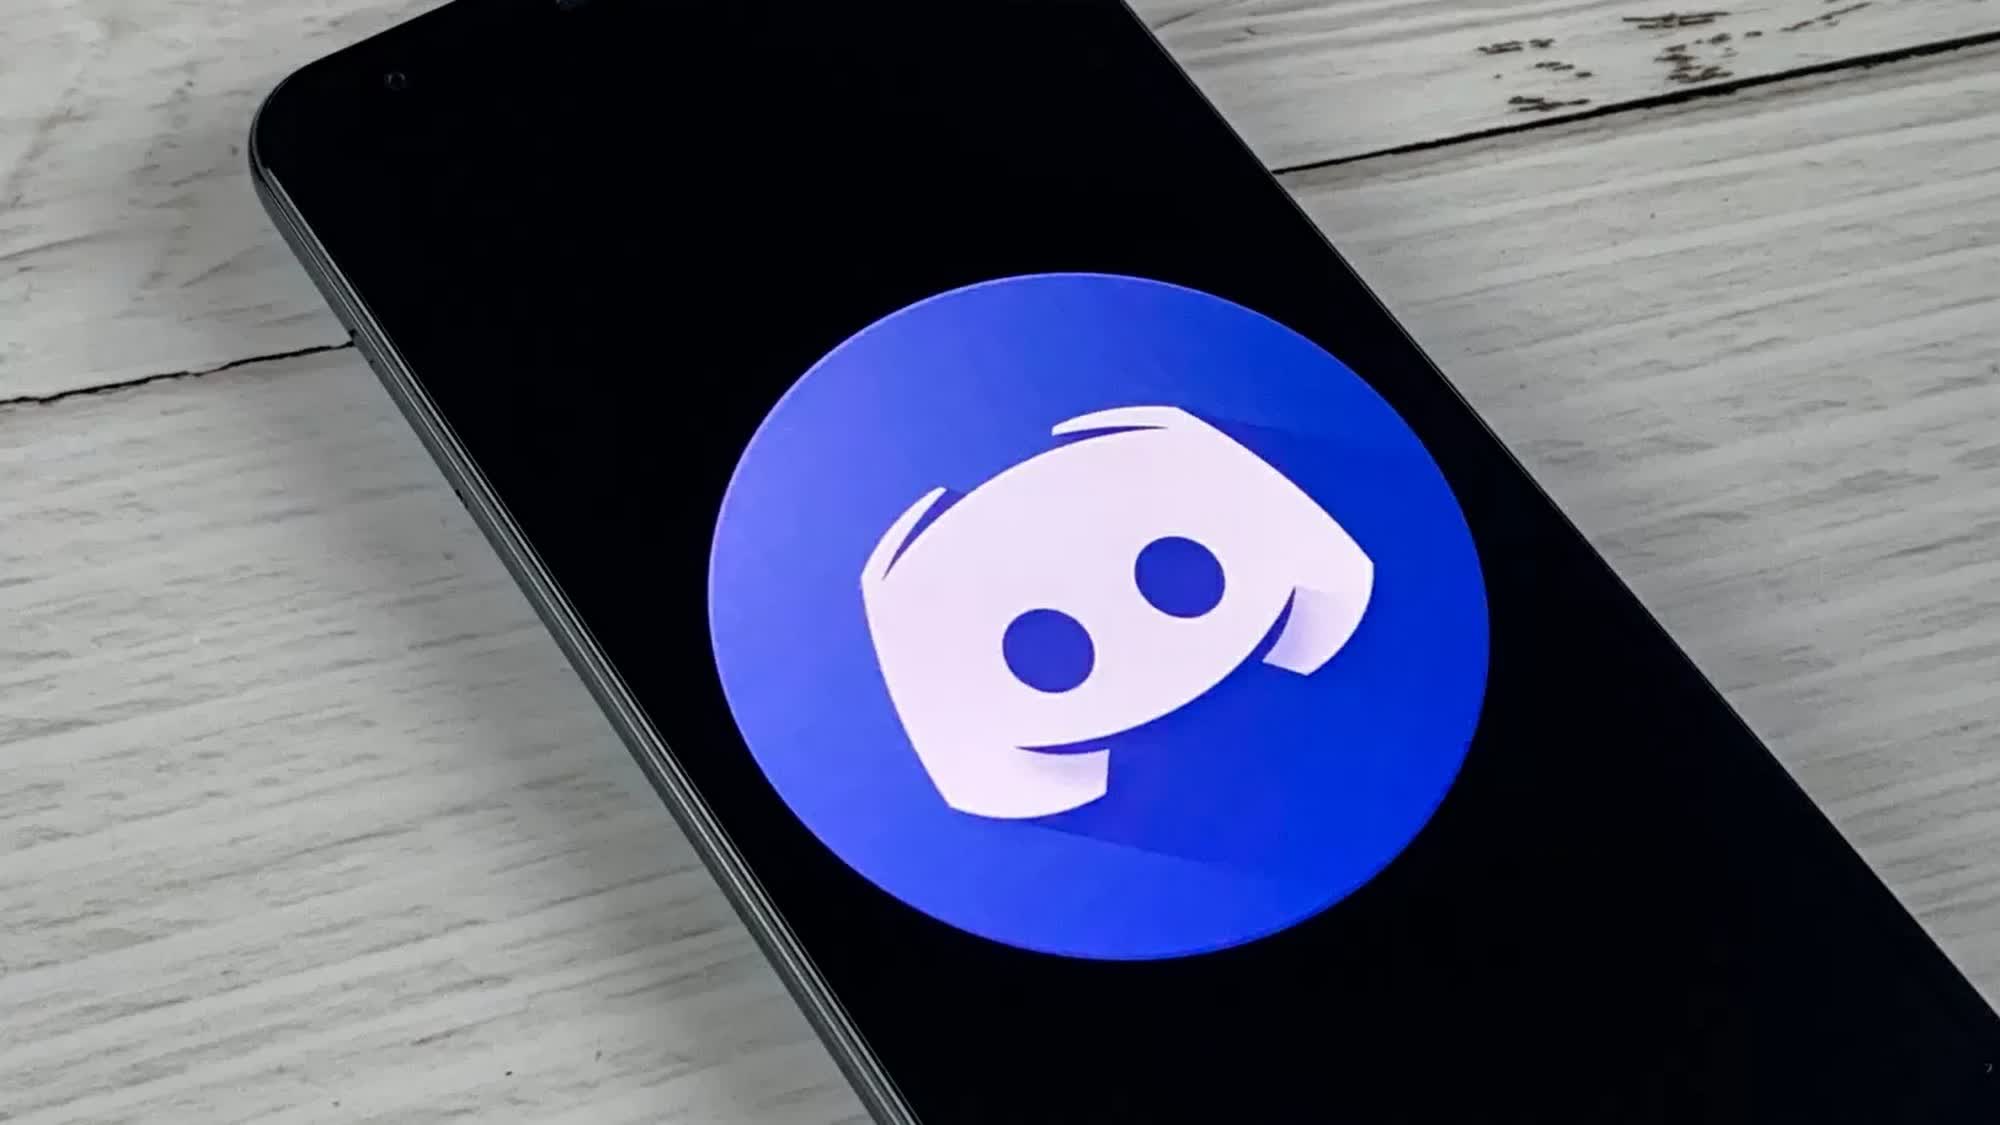 Discord claims more than 200 million monthly active users, planning an IPO